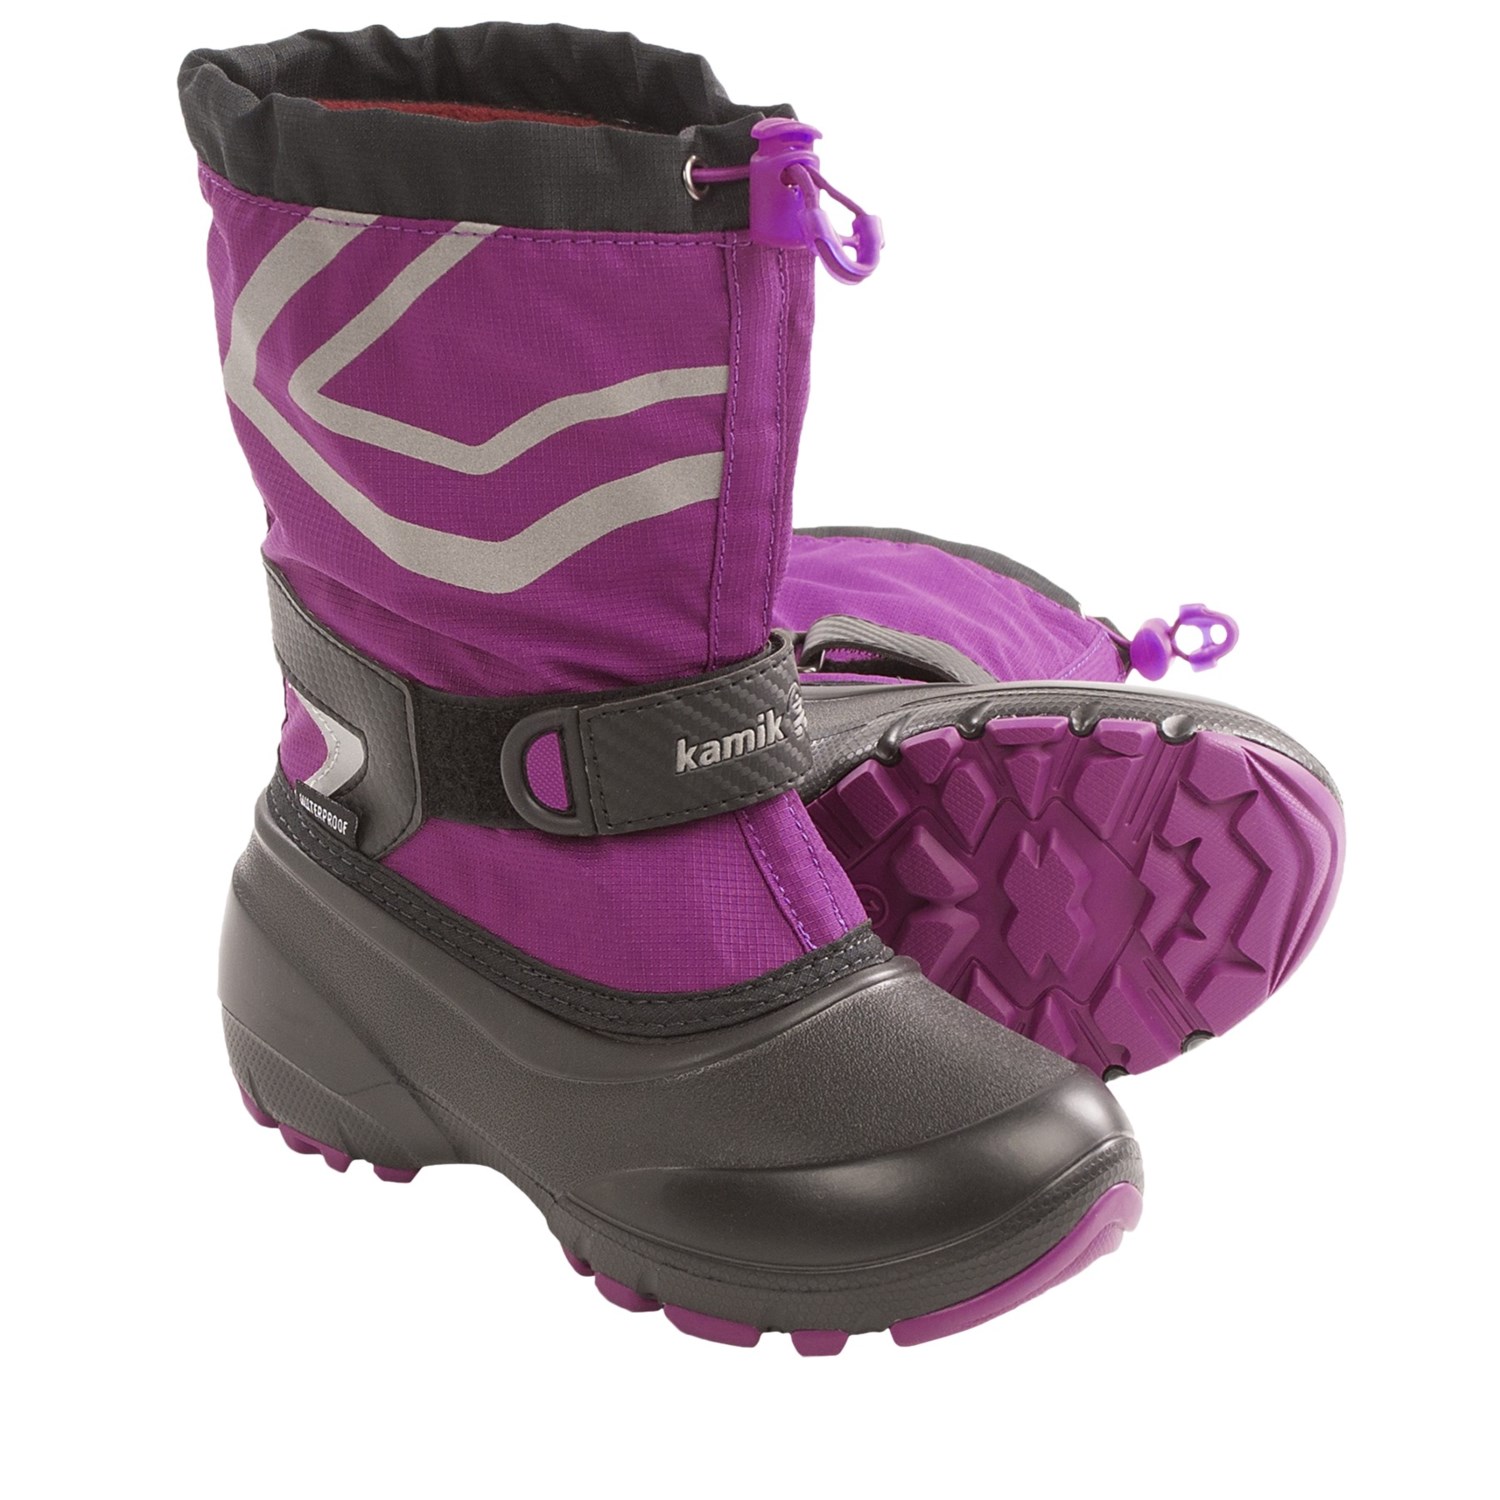 Kids Snow Boots Sale - Cr Boot